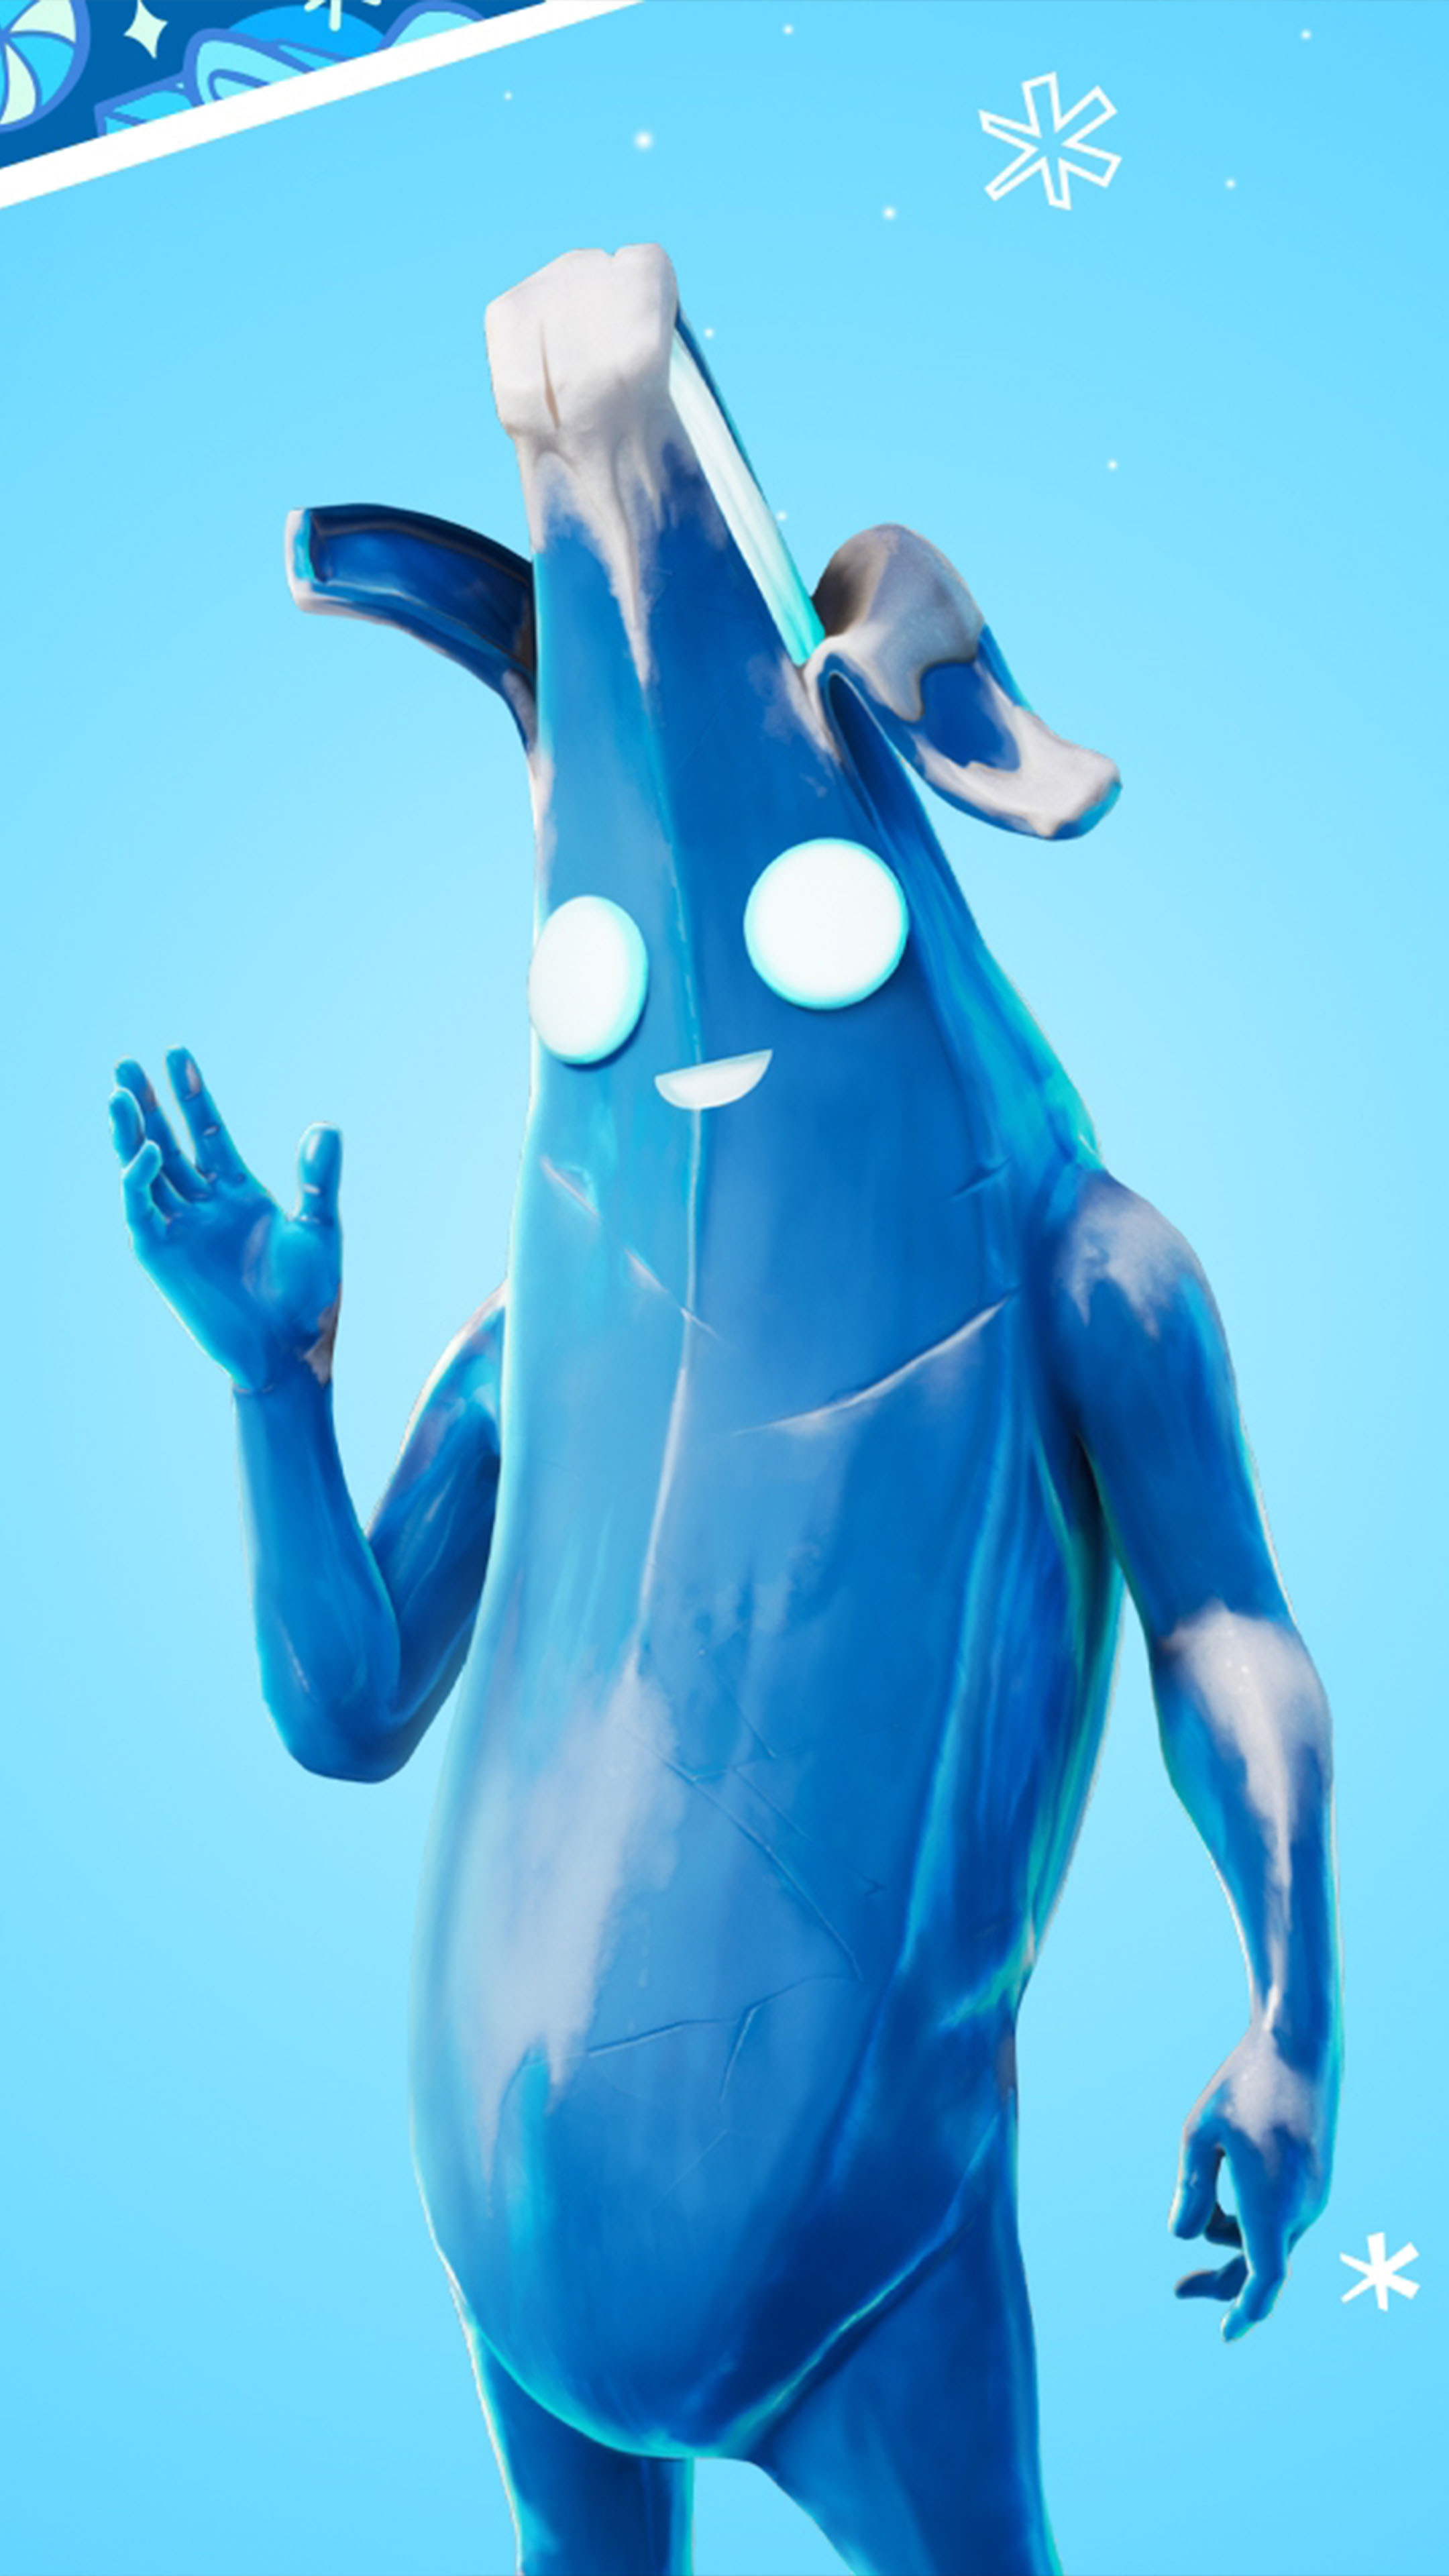 Discover 61+ peely fortnite wallpaper - in.cdgdbentre